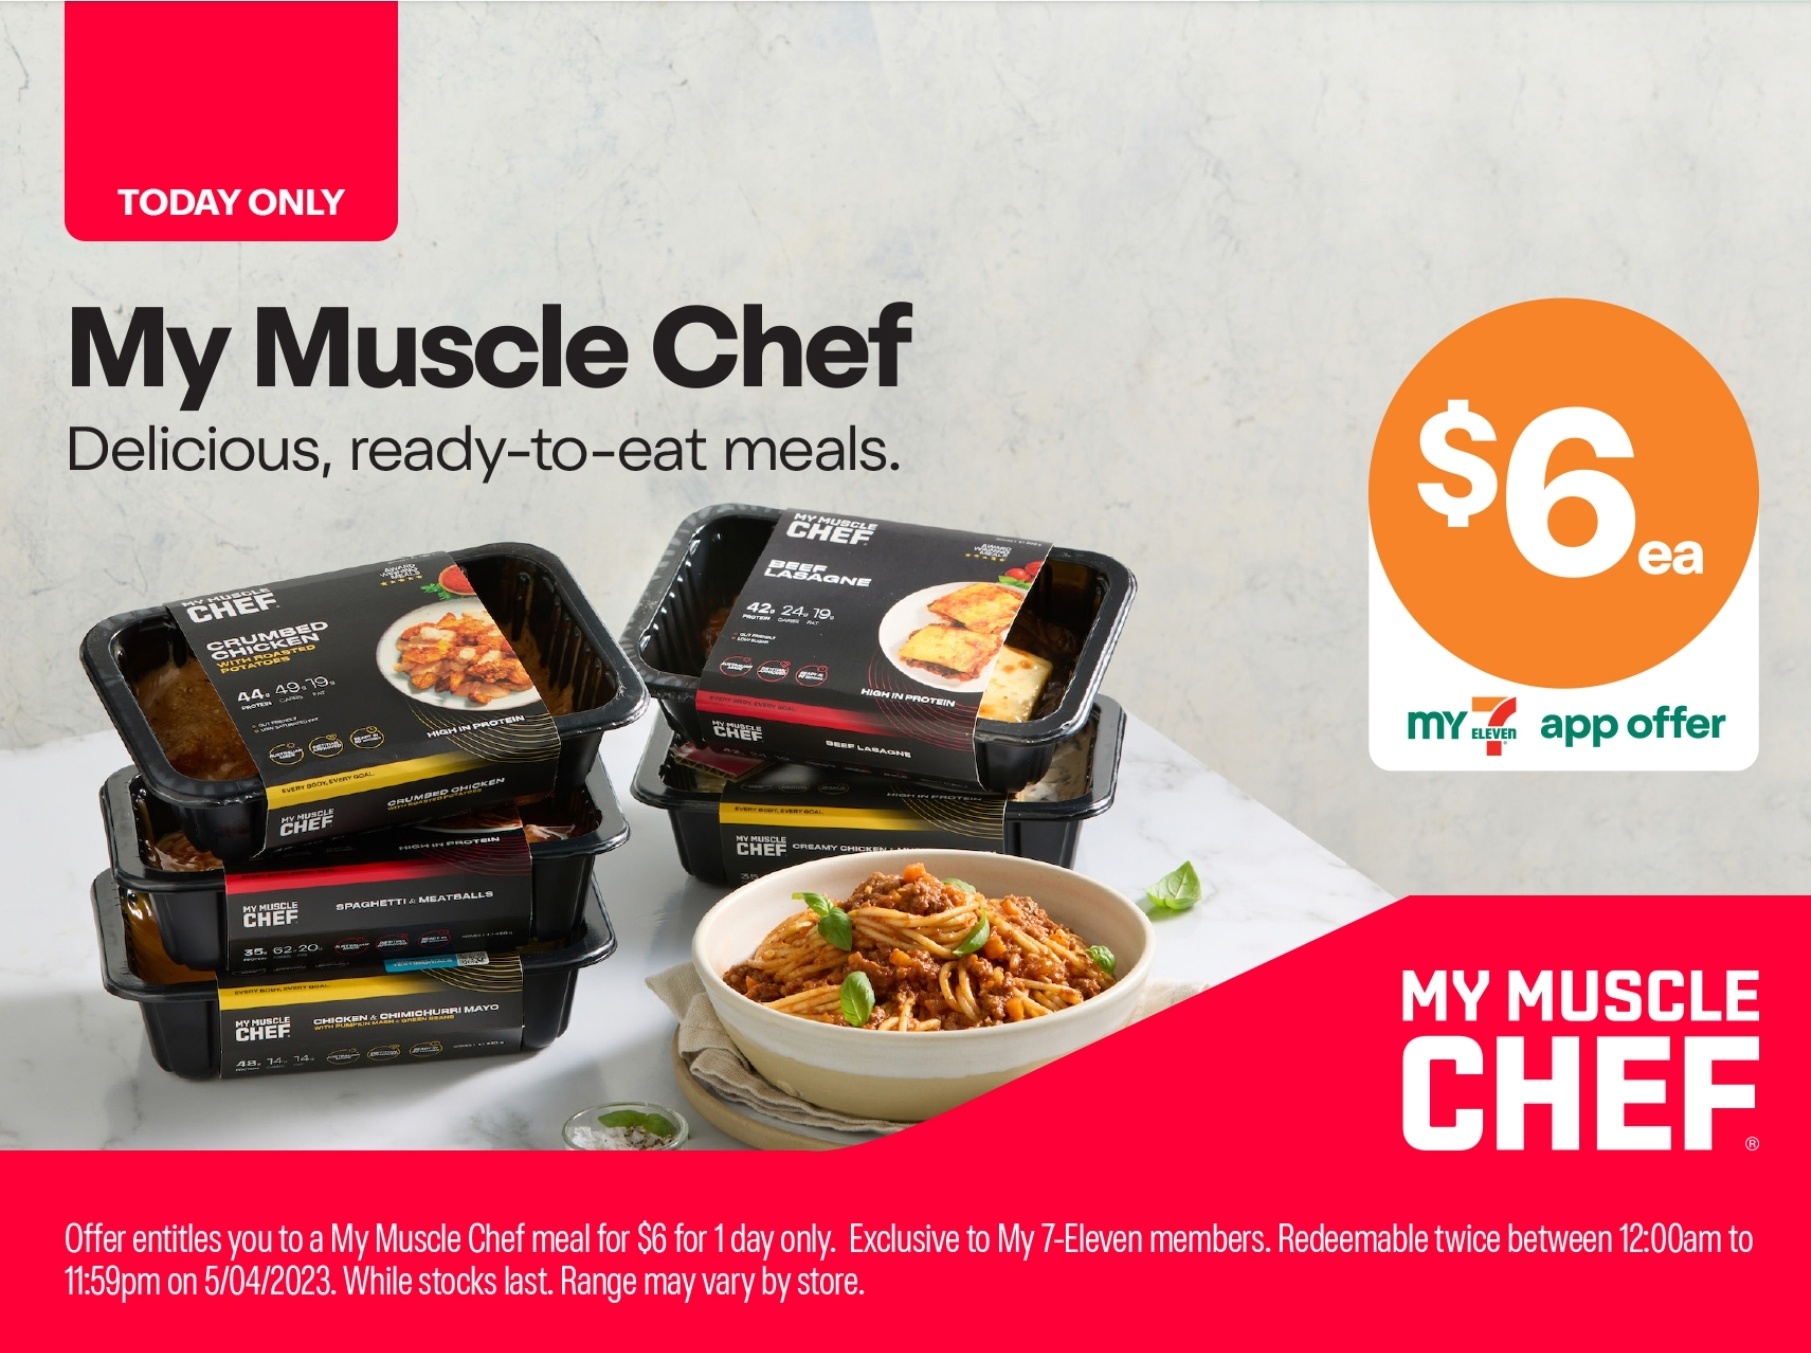 my muscle chef 7/11